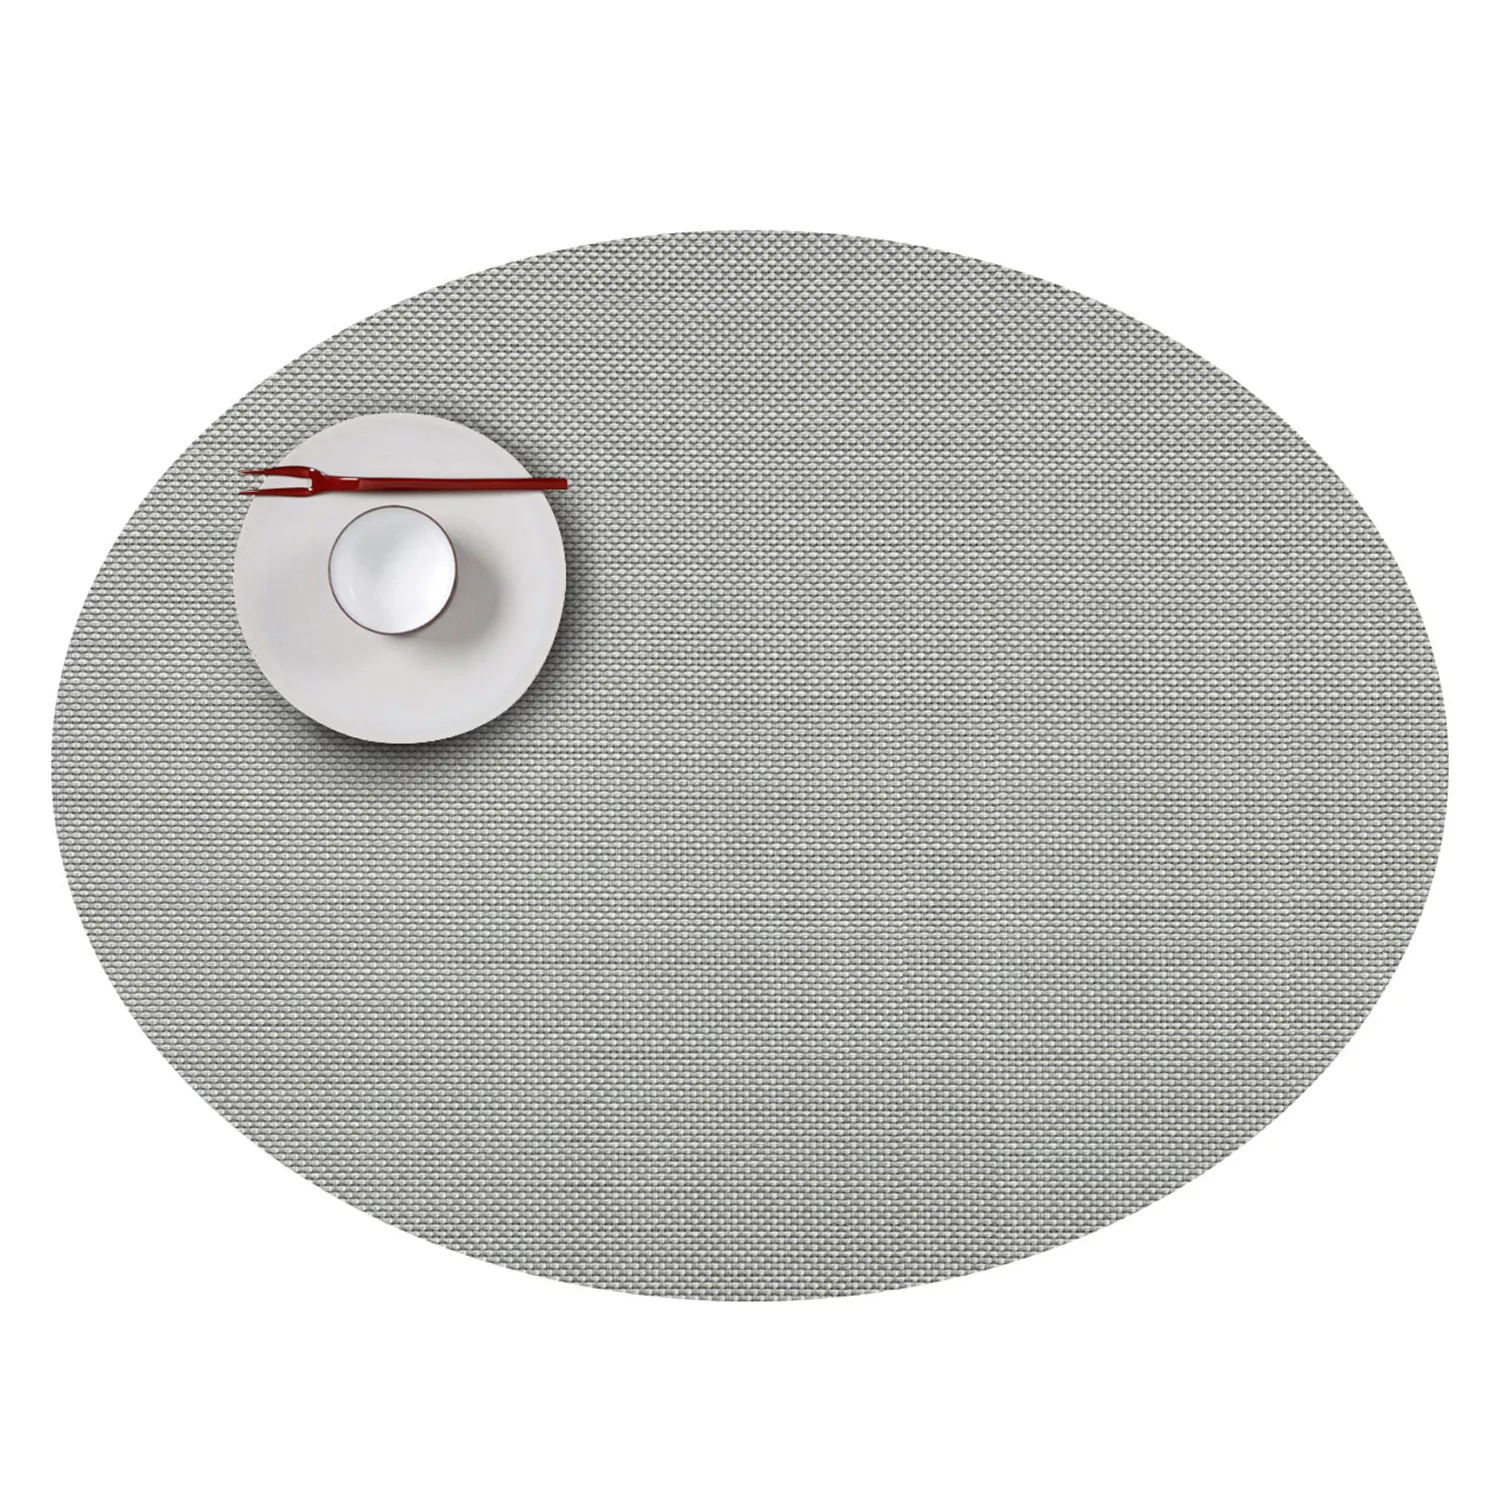 Chilewich Mini Basketweave Oval Placemat, 14&#34; x 19.25&#34;